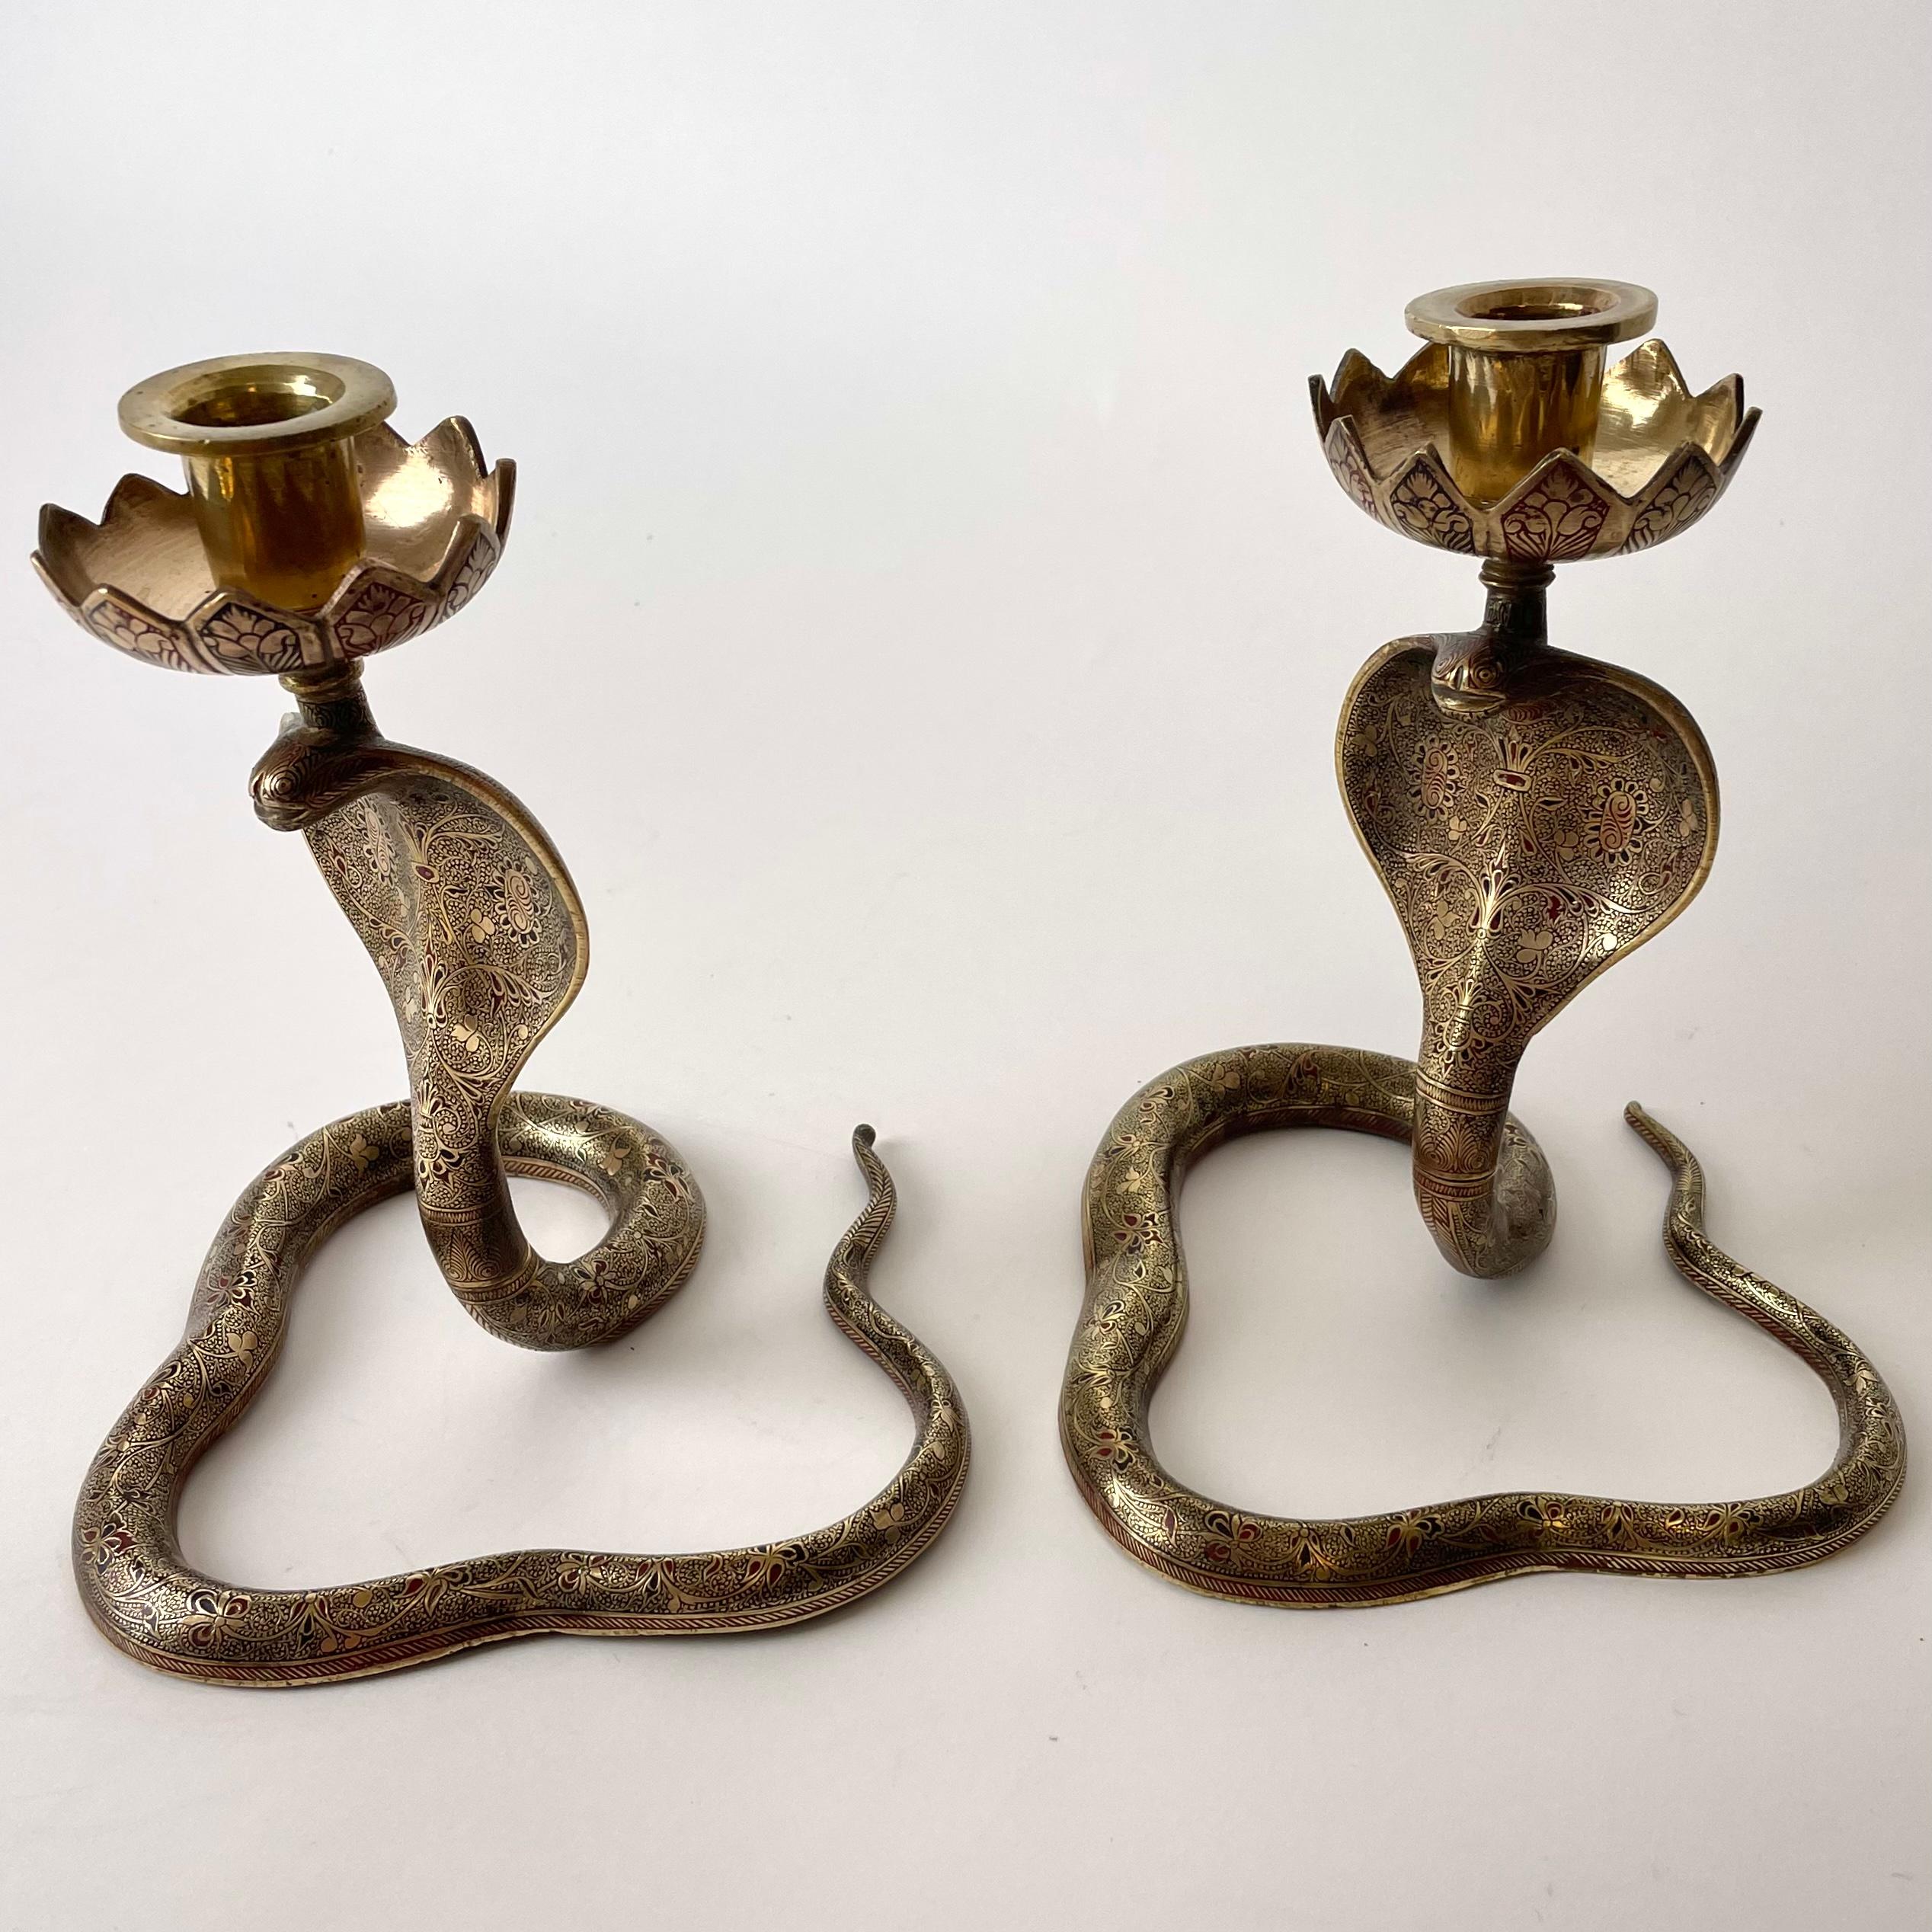 A very cool pair of Brass Cobra Candlesticks. Probably made in India during the 1930s. Fine craftmanship with rich decoration of flowers and leaves.

Wear consistent with age and use.